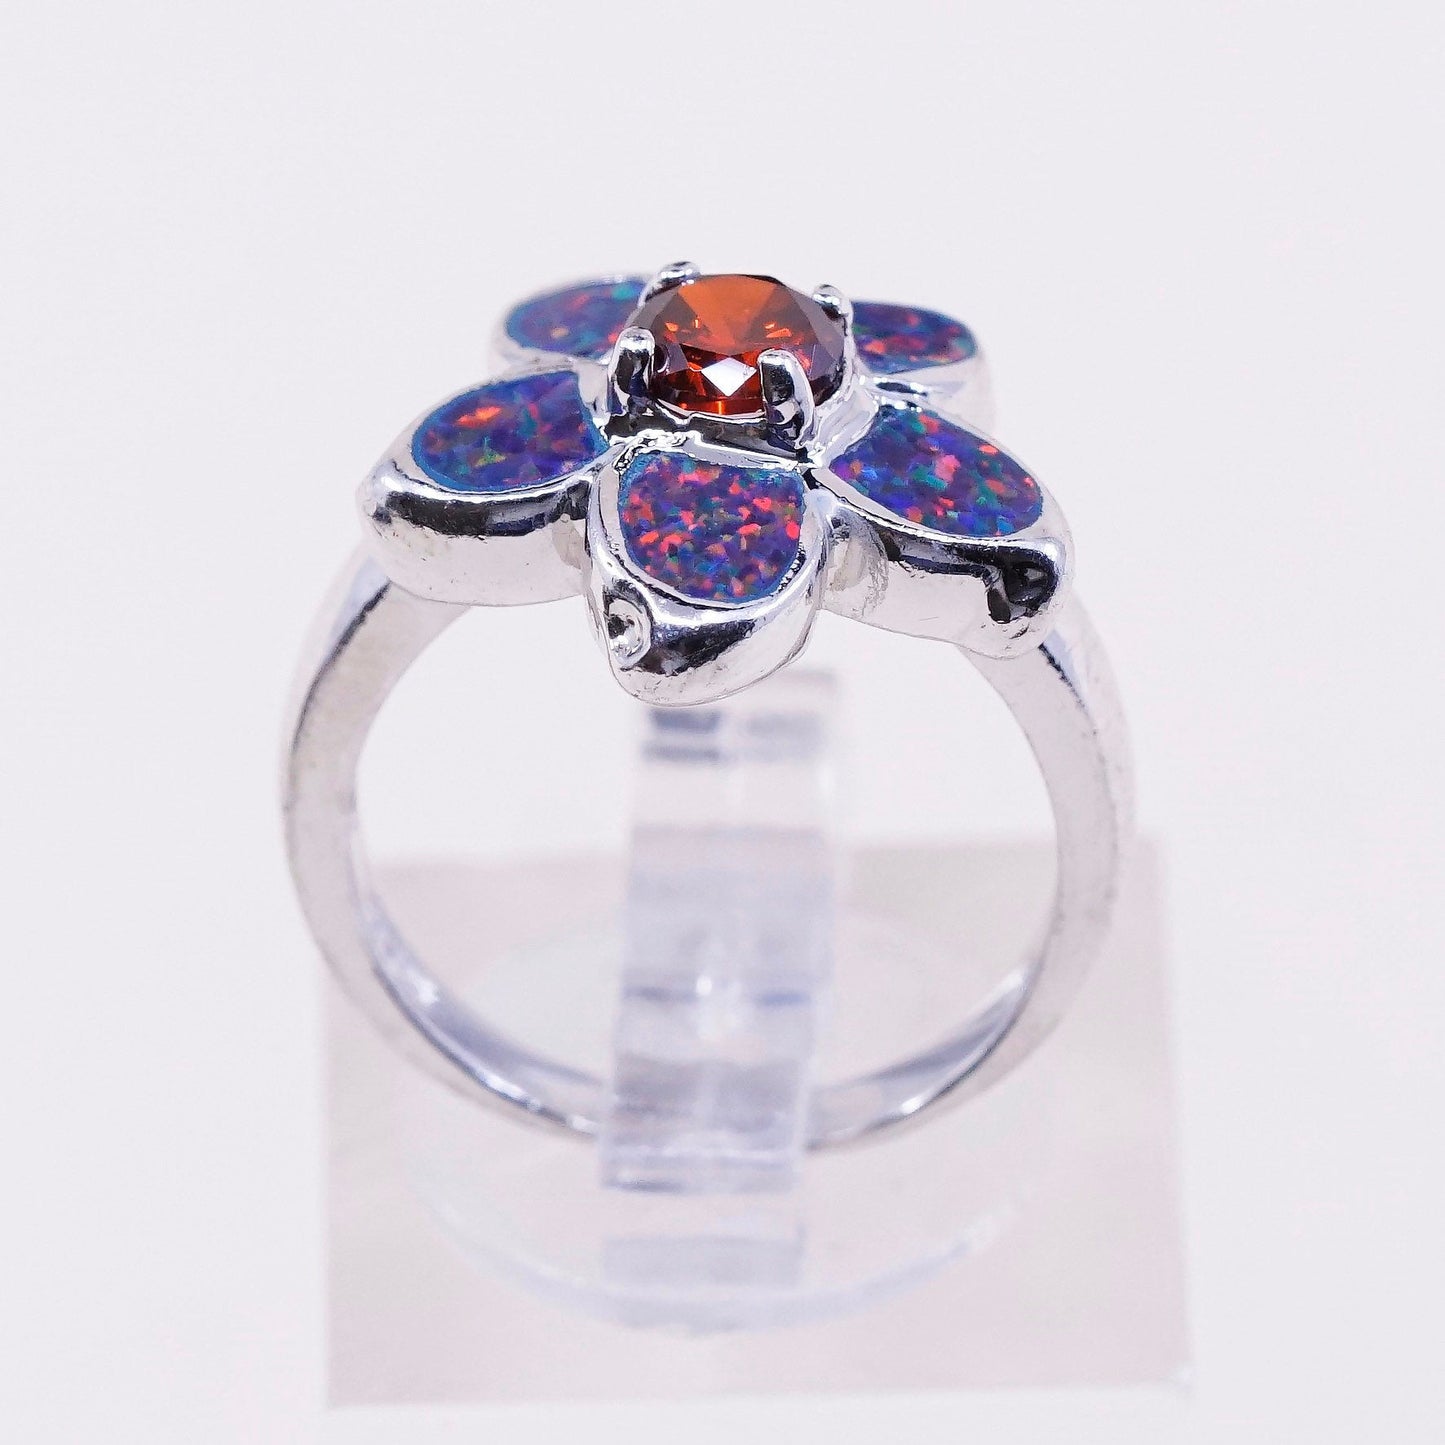 sz 6, Sterling 925 silver handmade flower ring w/ fire opal and ruby